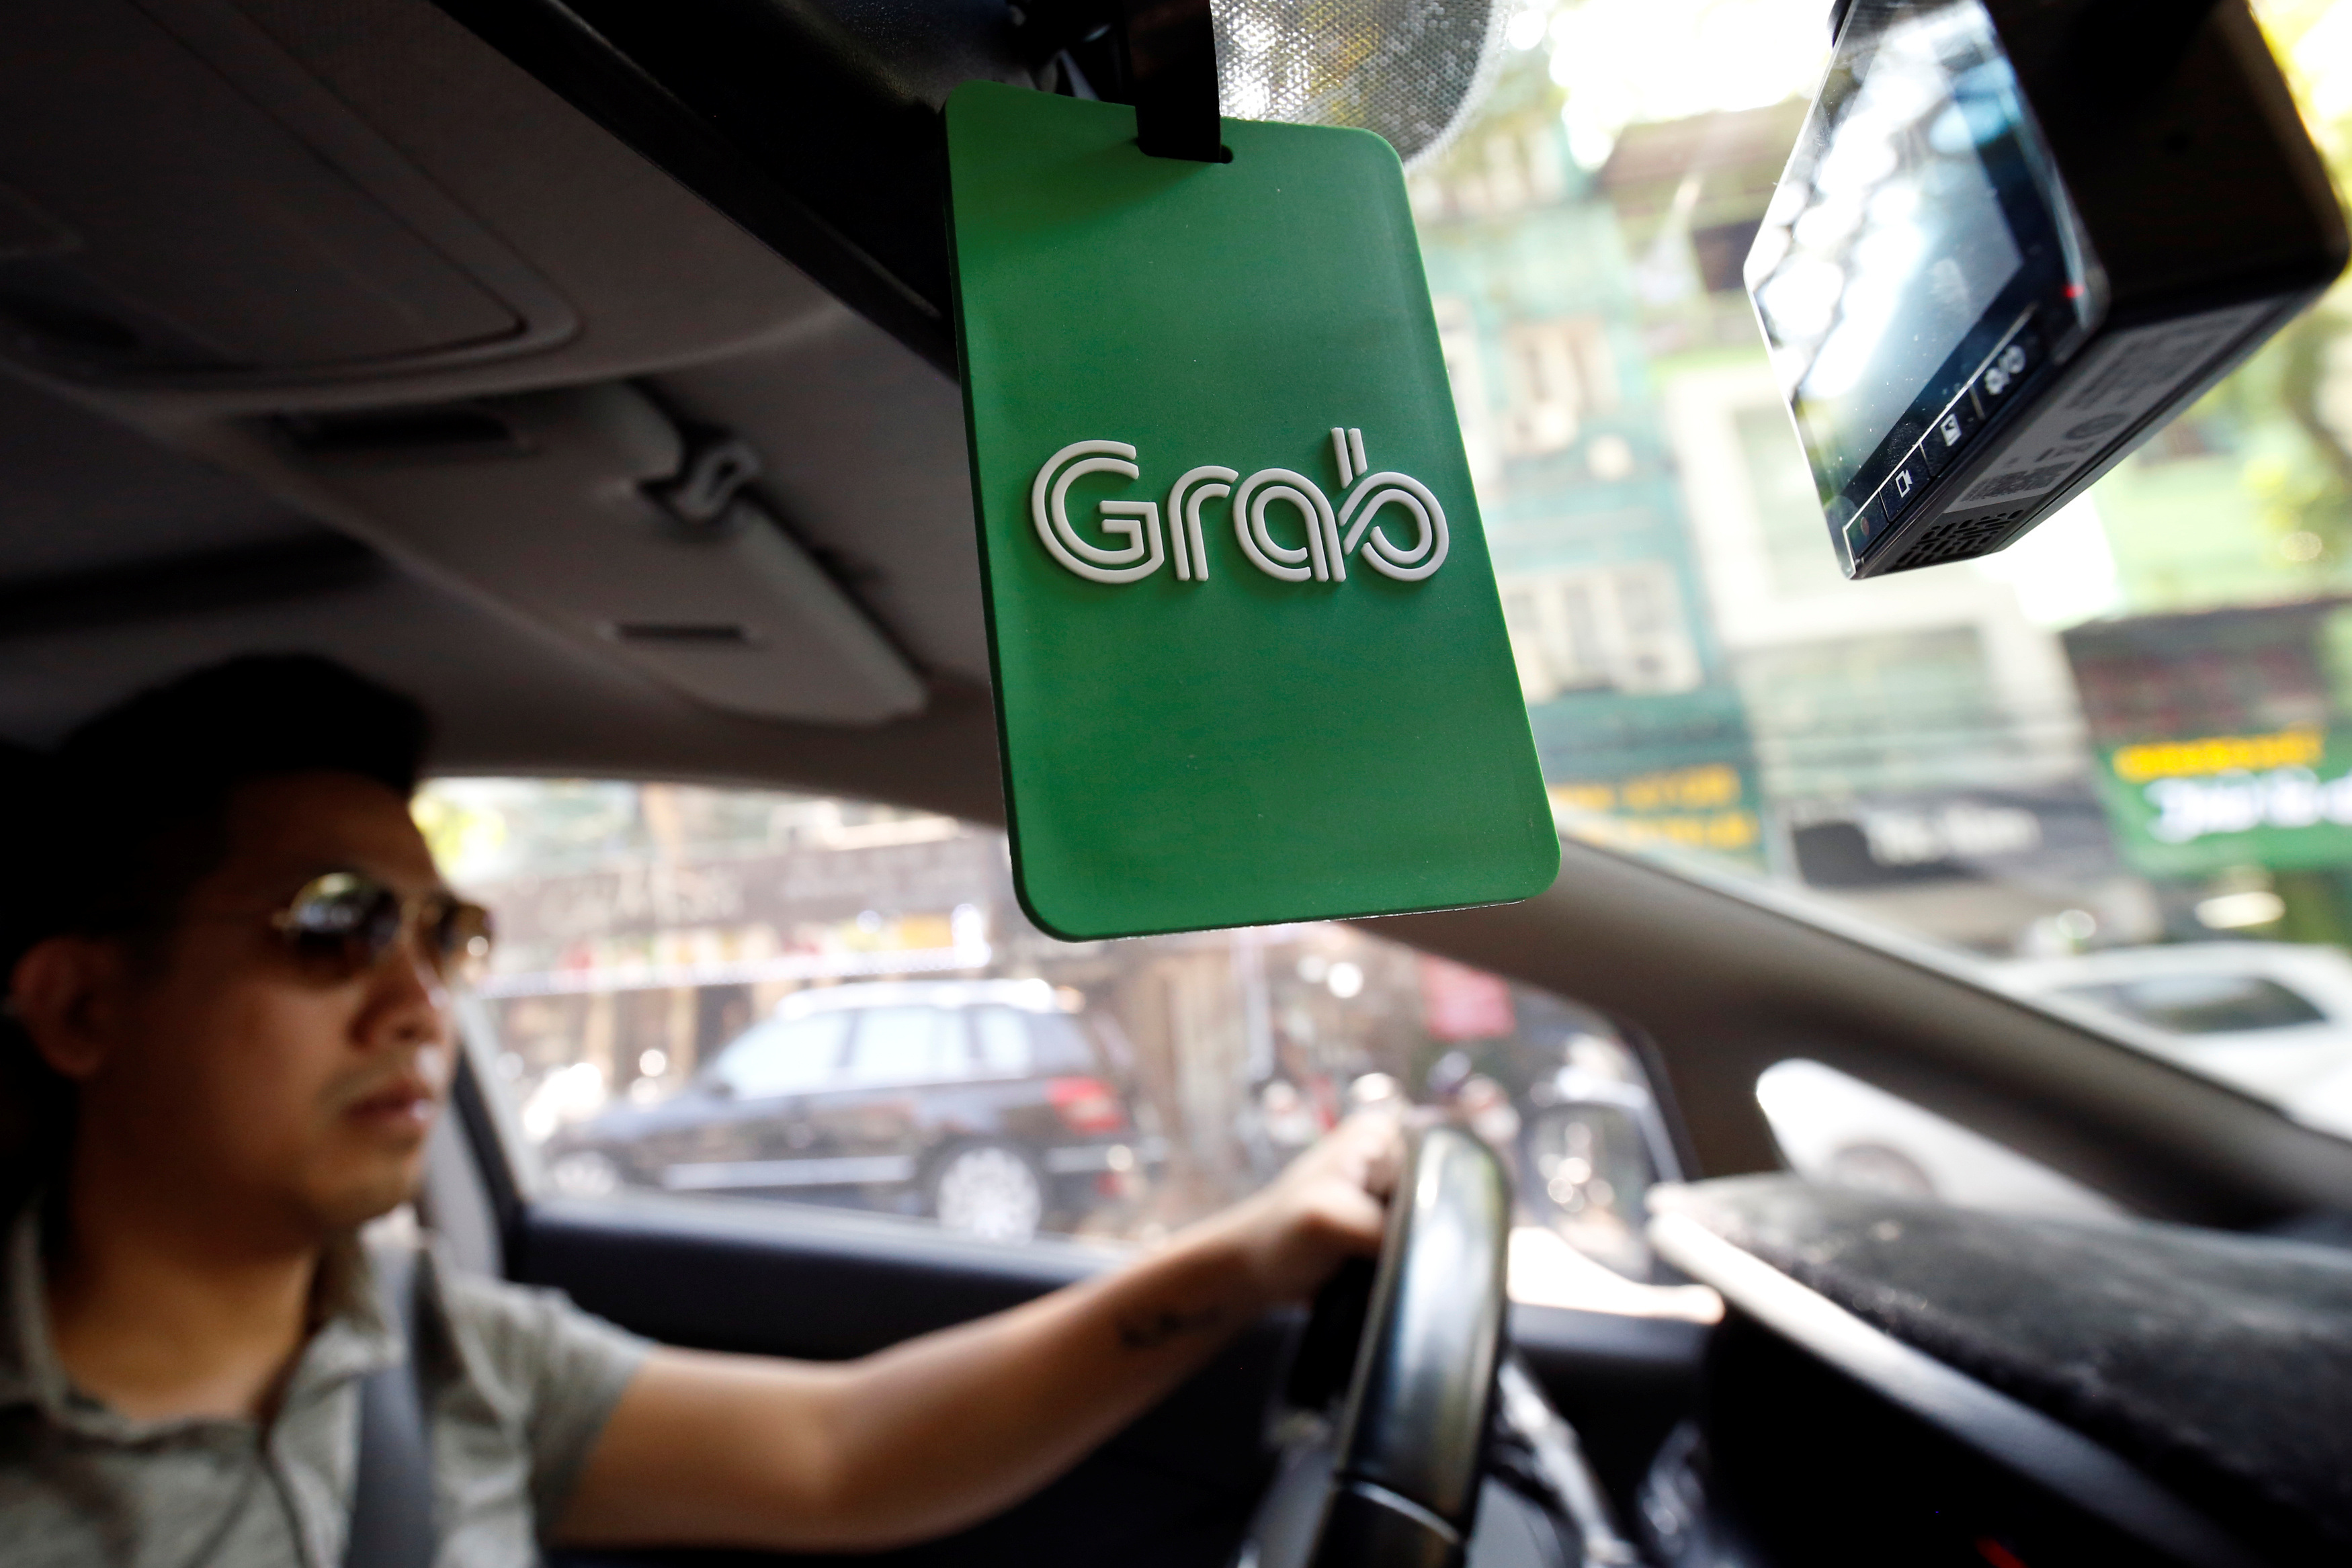 A Grab taxi drives on a street in Hanoi